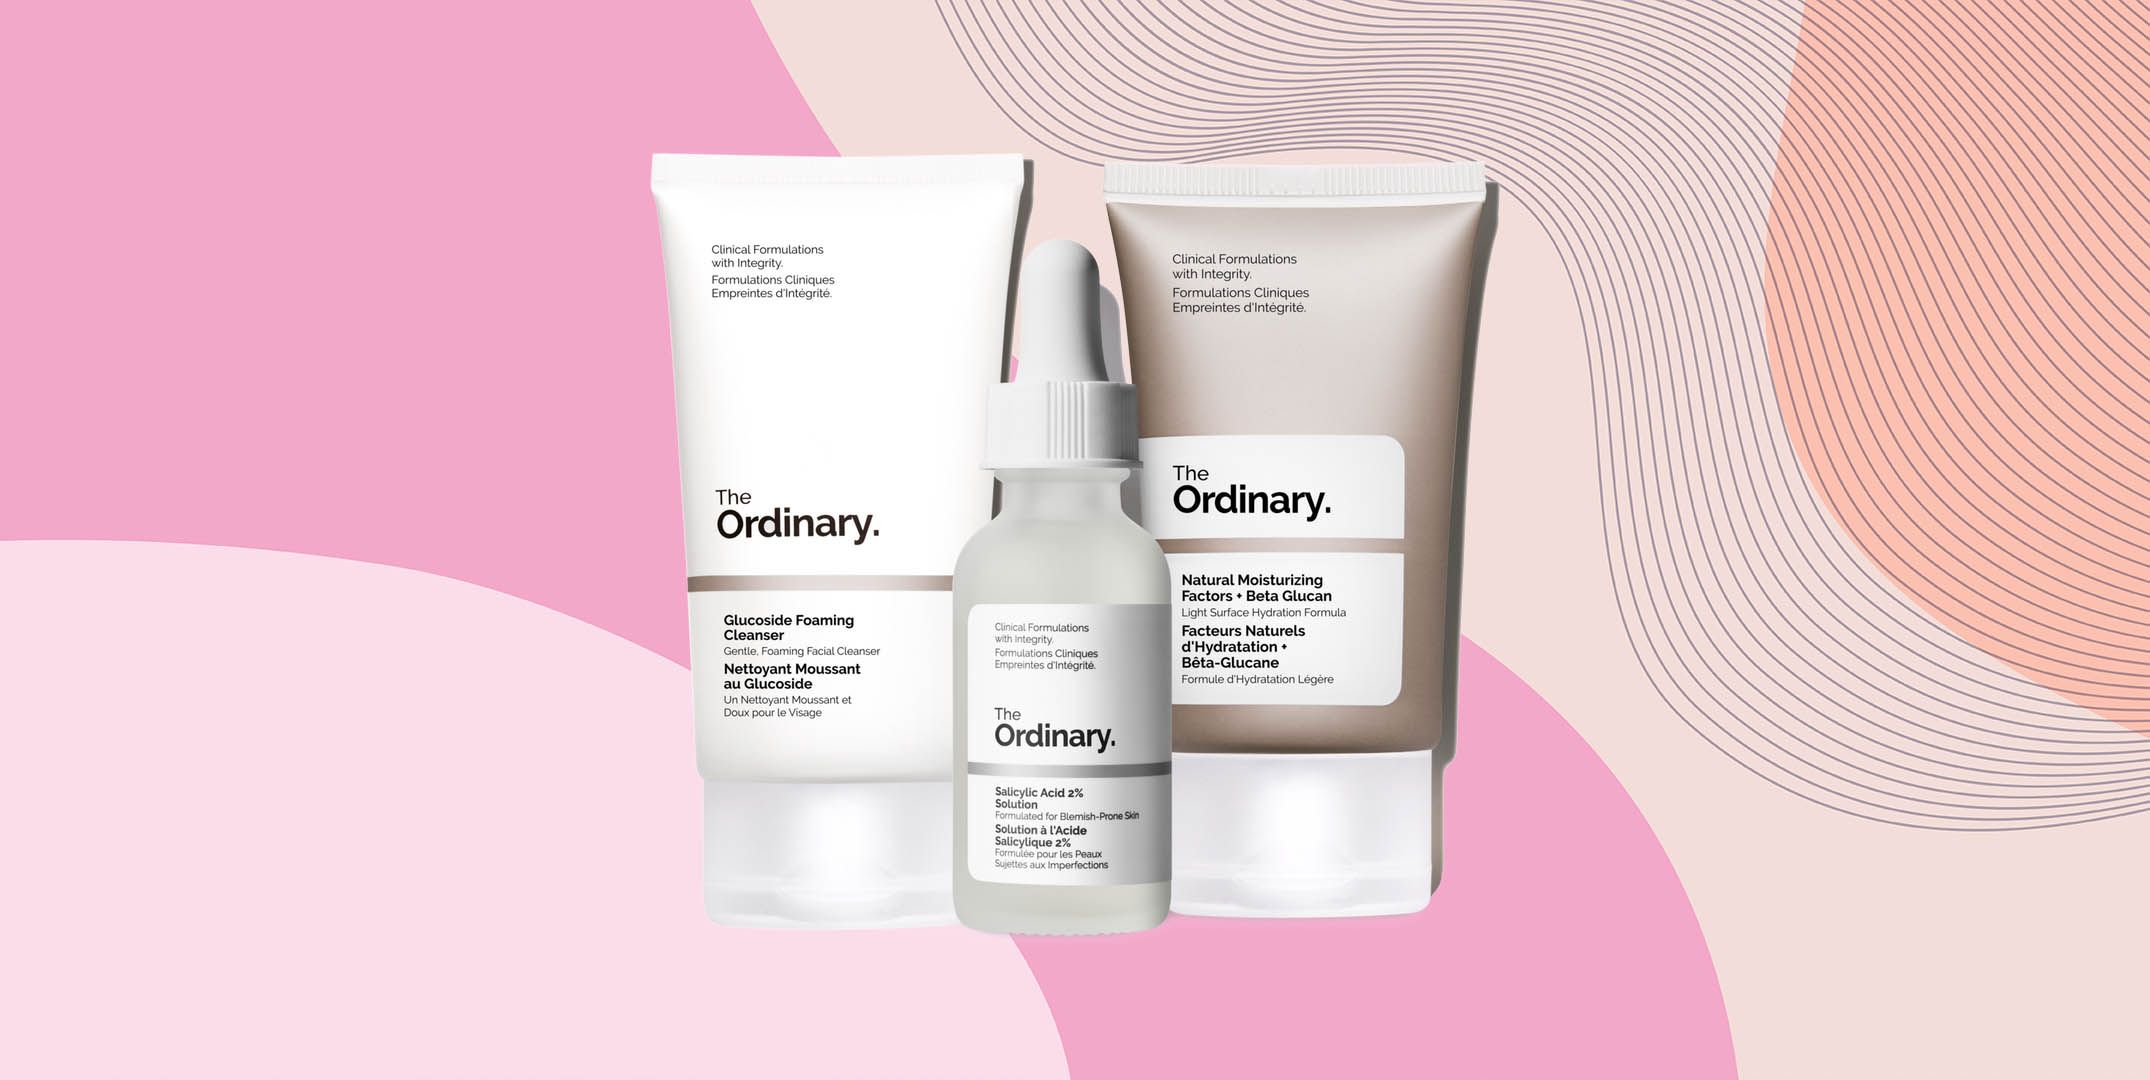 What To Buy From The Ordinary | Best Routine For Every Skin Type